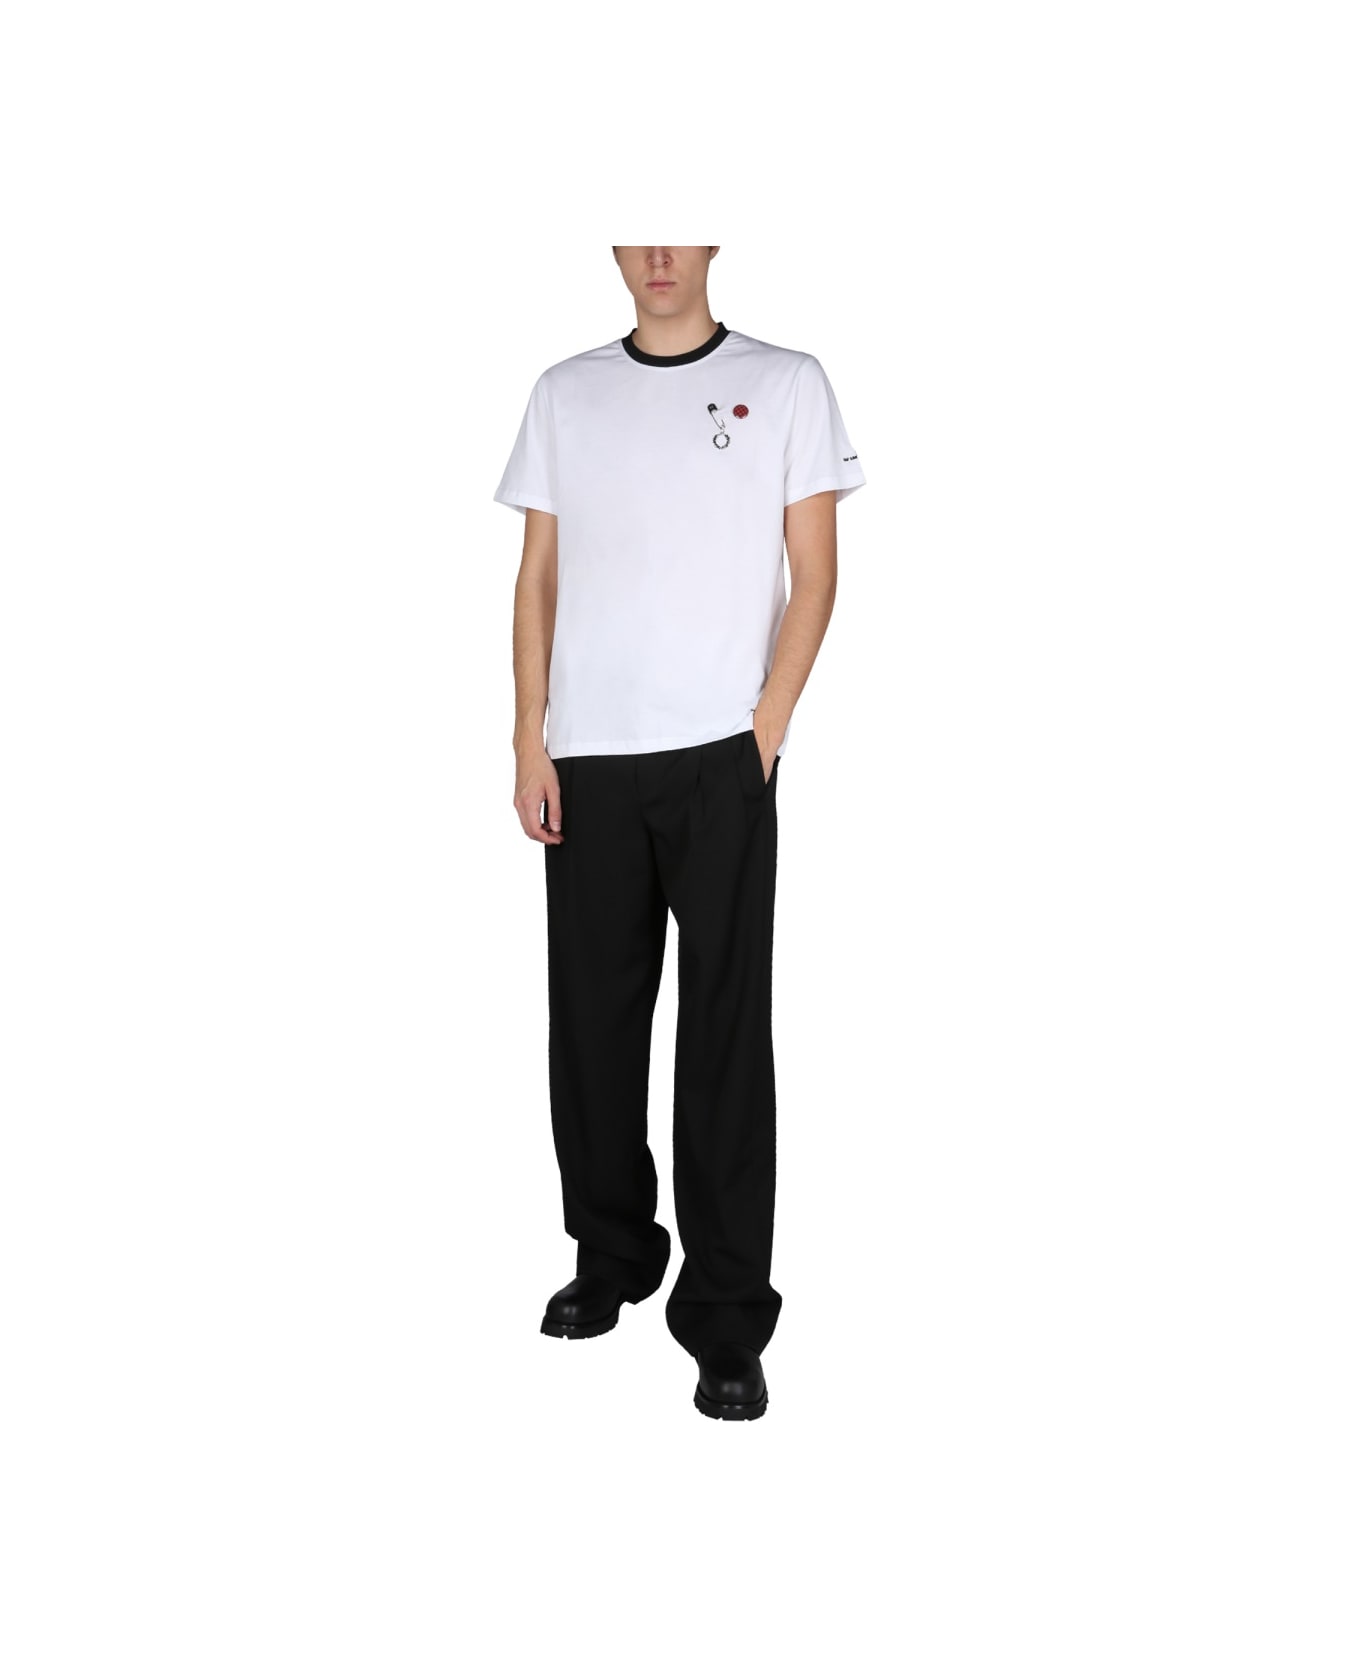 Fred Perry by Raf Simons Slim Fit T-shirt - WHITE